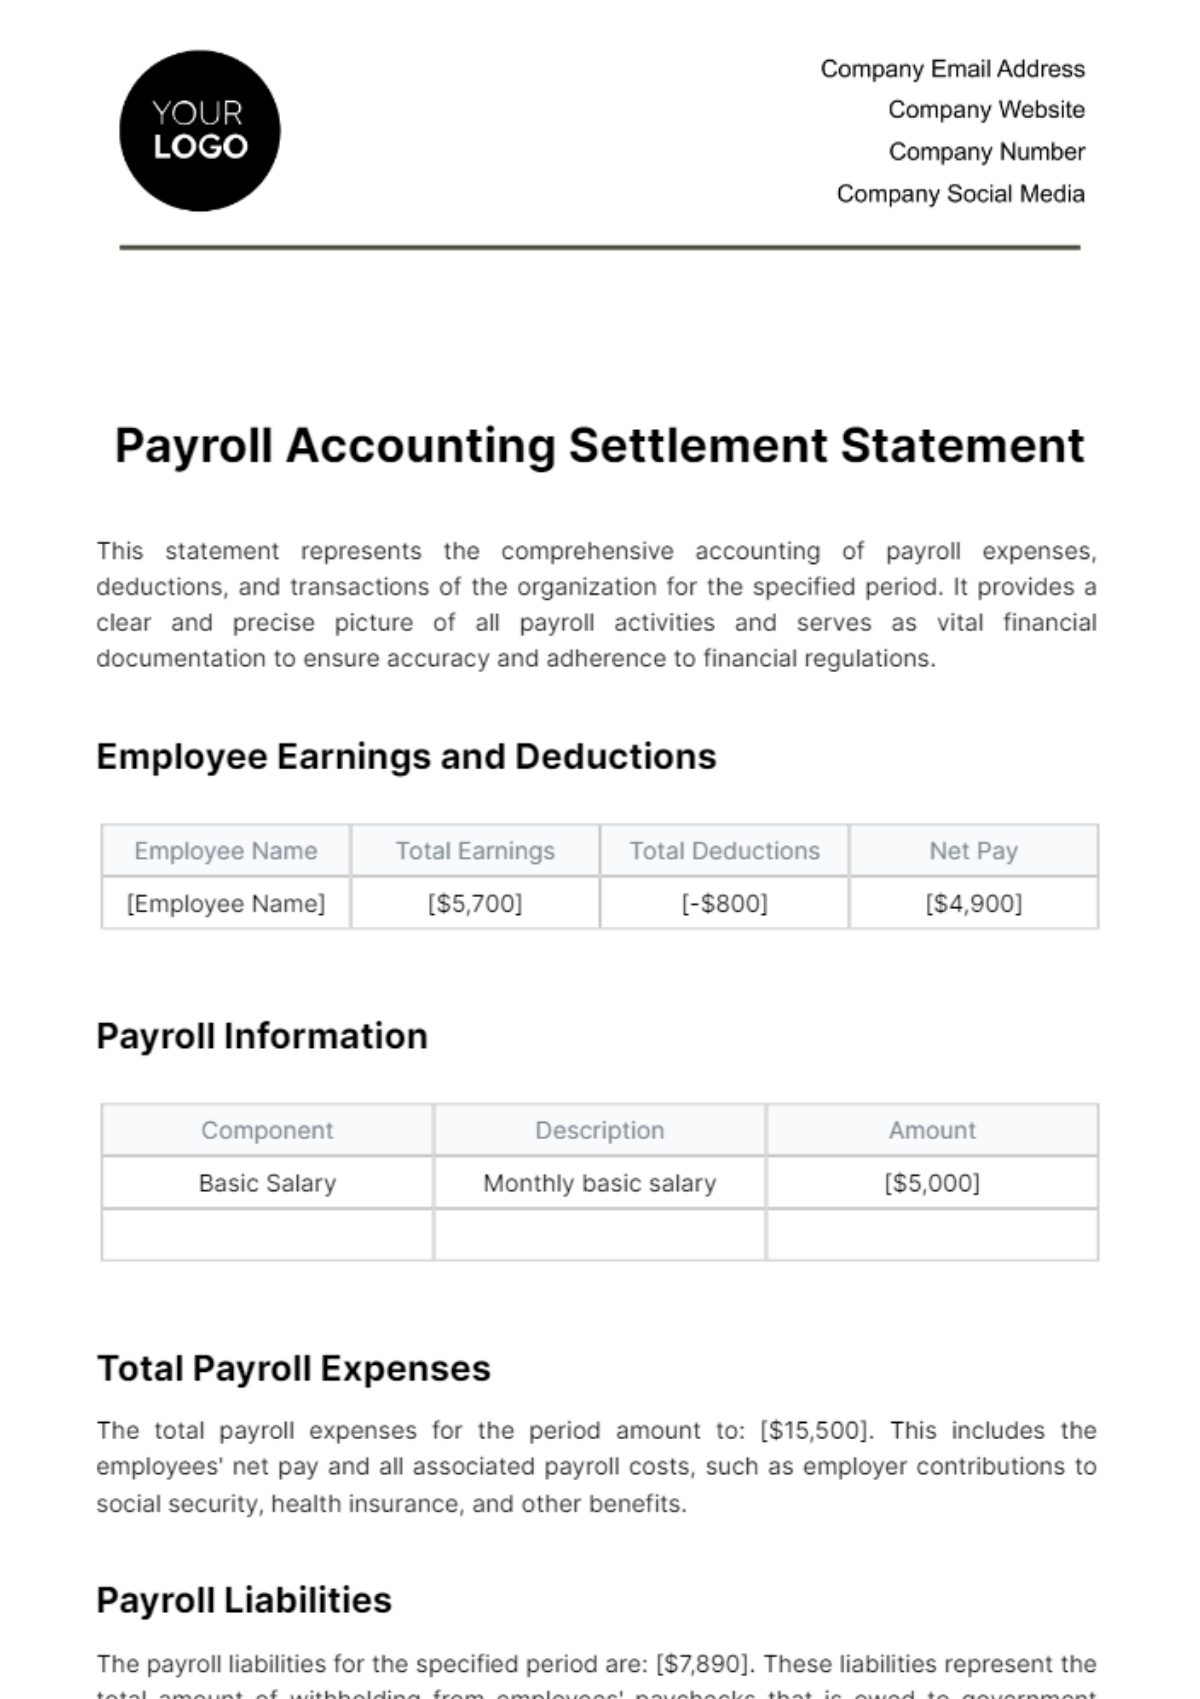 Payroll Accounting Settlement Statement Template